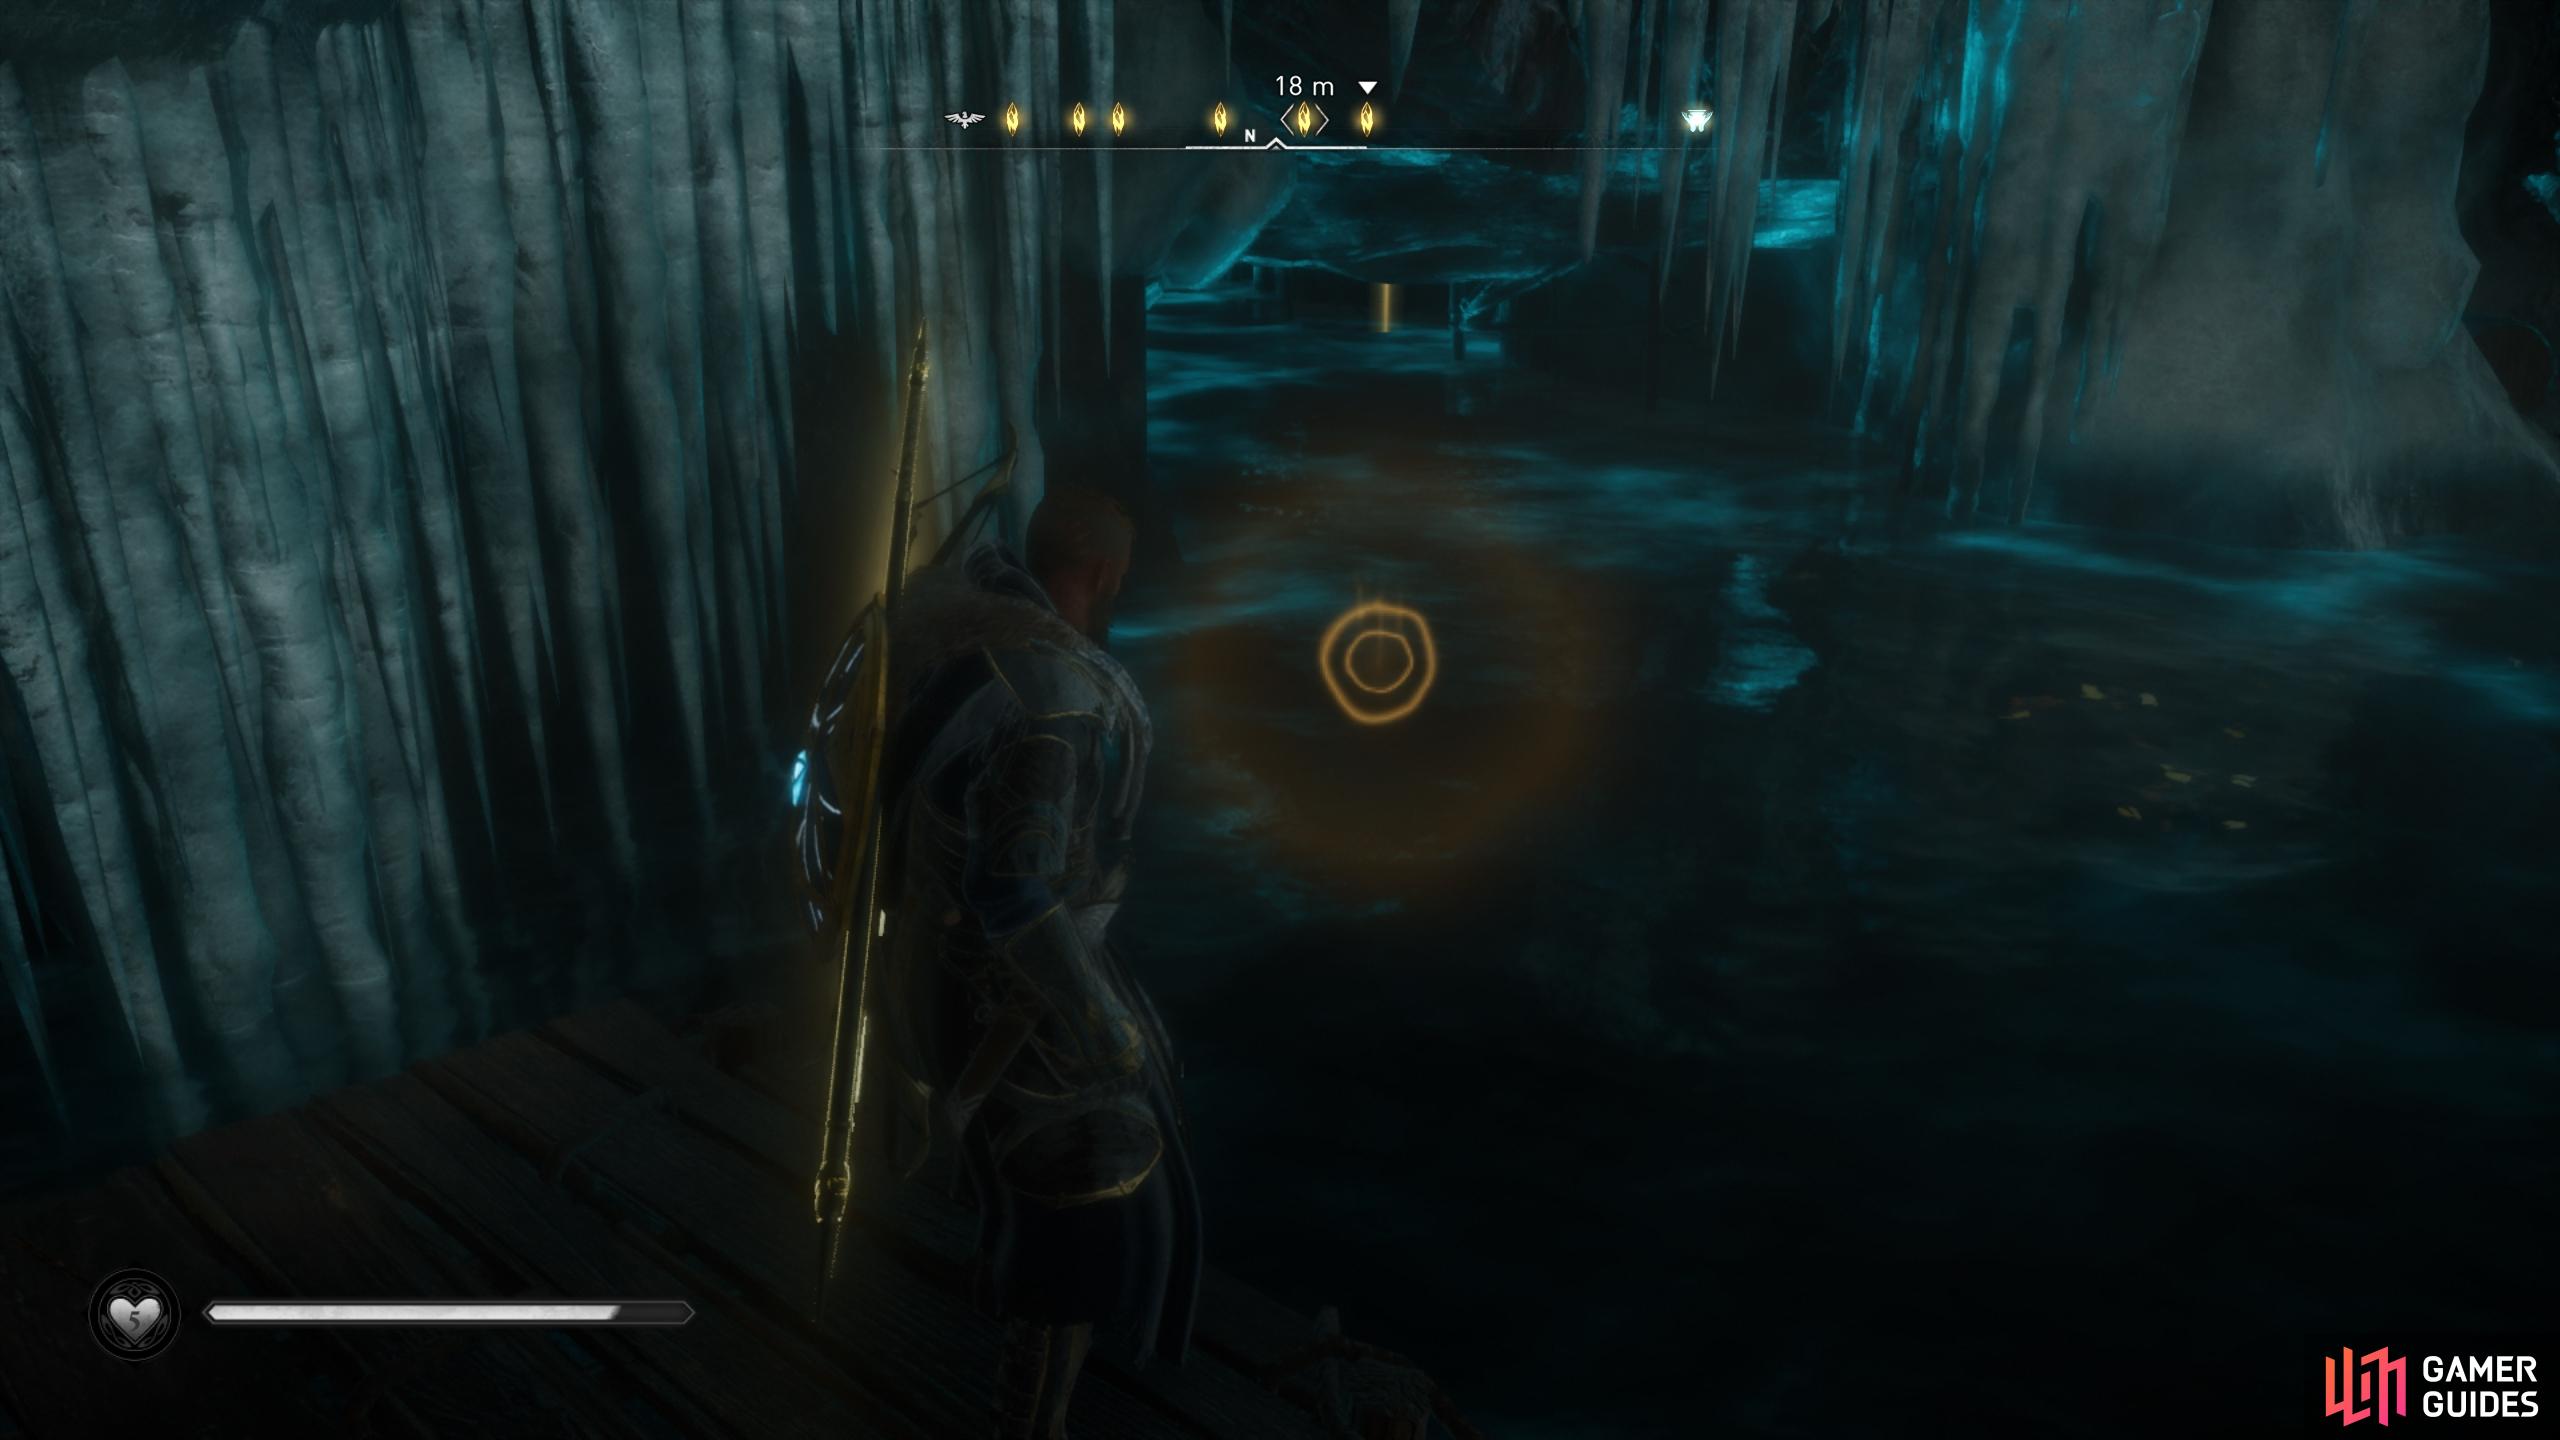 Once inside the chamber, dive in the water to find the chest below.